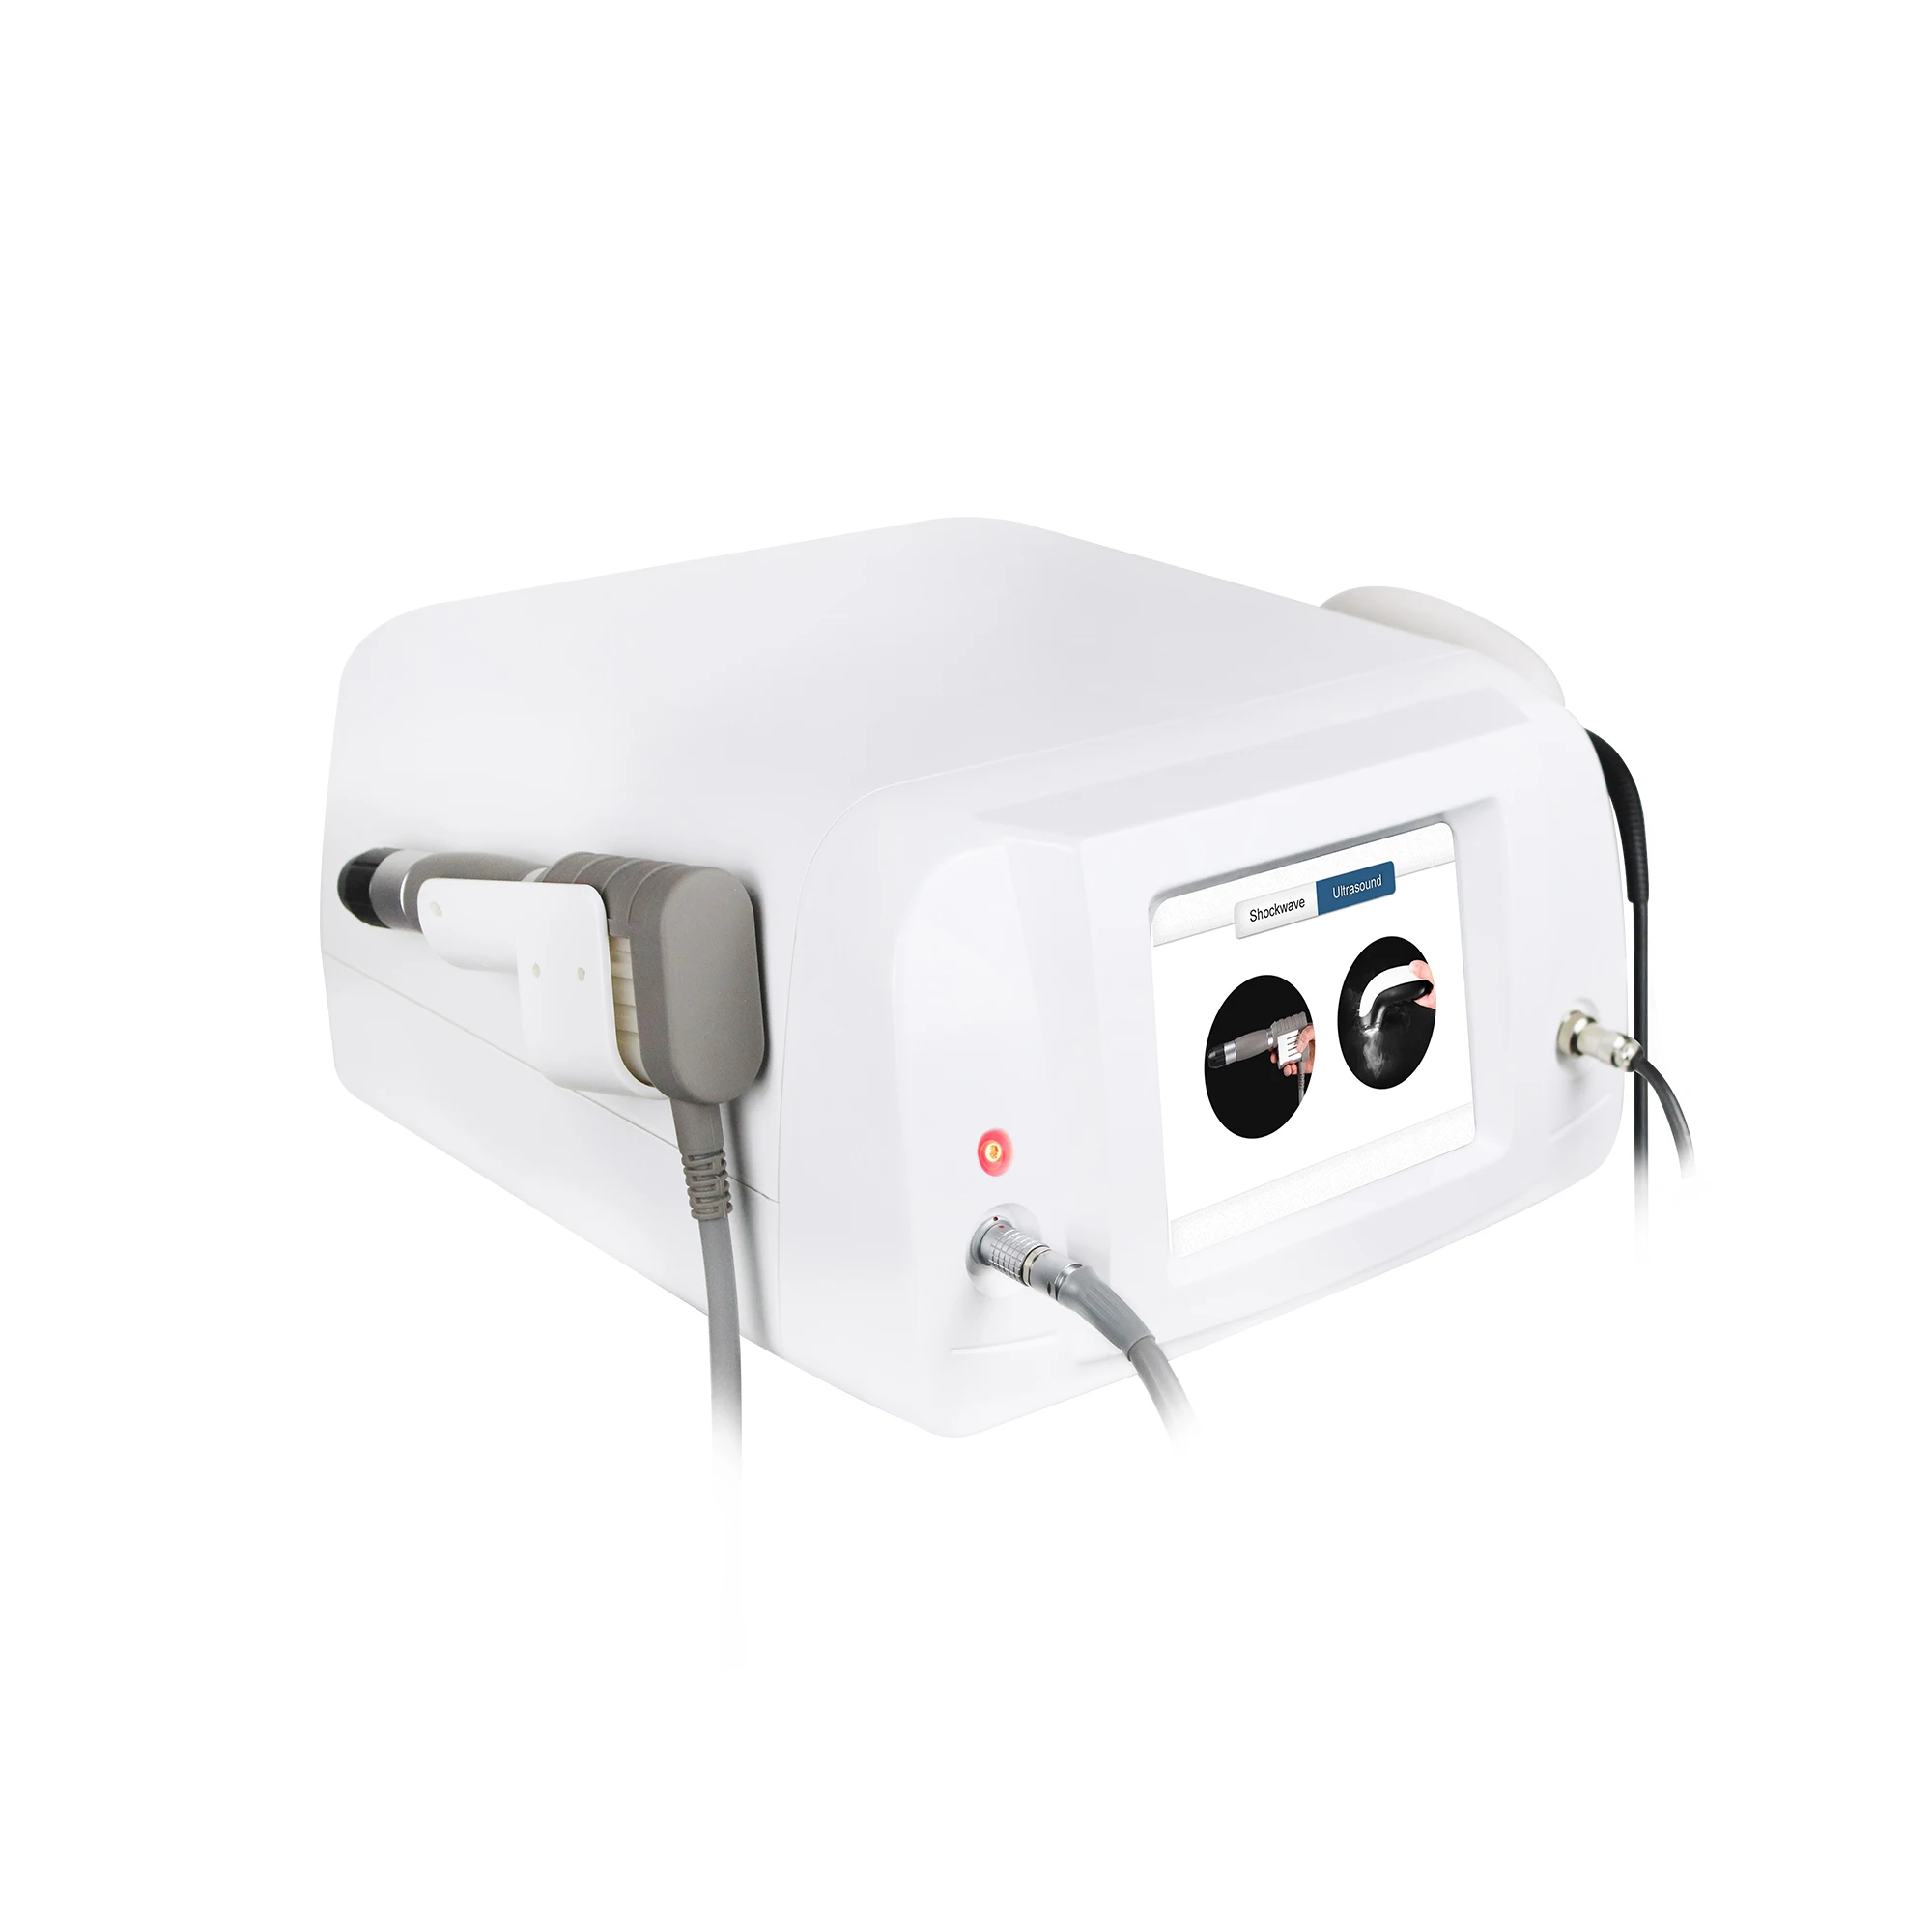 https://ae01.alicdn.com/kf/Sc2294d48922241e89155e0d71a87bb85u/2-In-1-Ultra-Eswt-Physical-Therapy-Equipment-Physiotherapy-Pain-Relief-Medical-Ultrasound-Instruments-Shockwave-Device.jpg